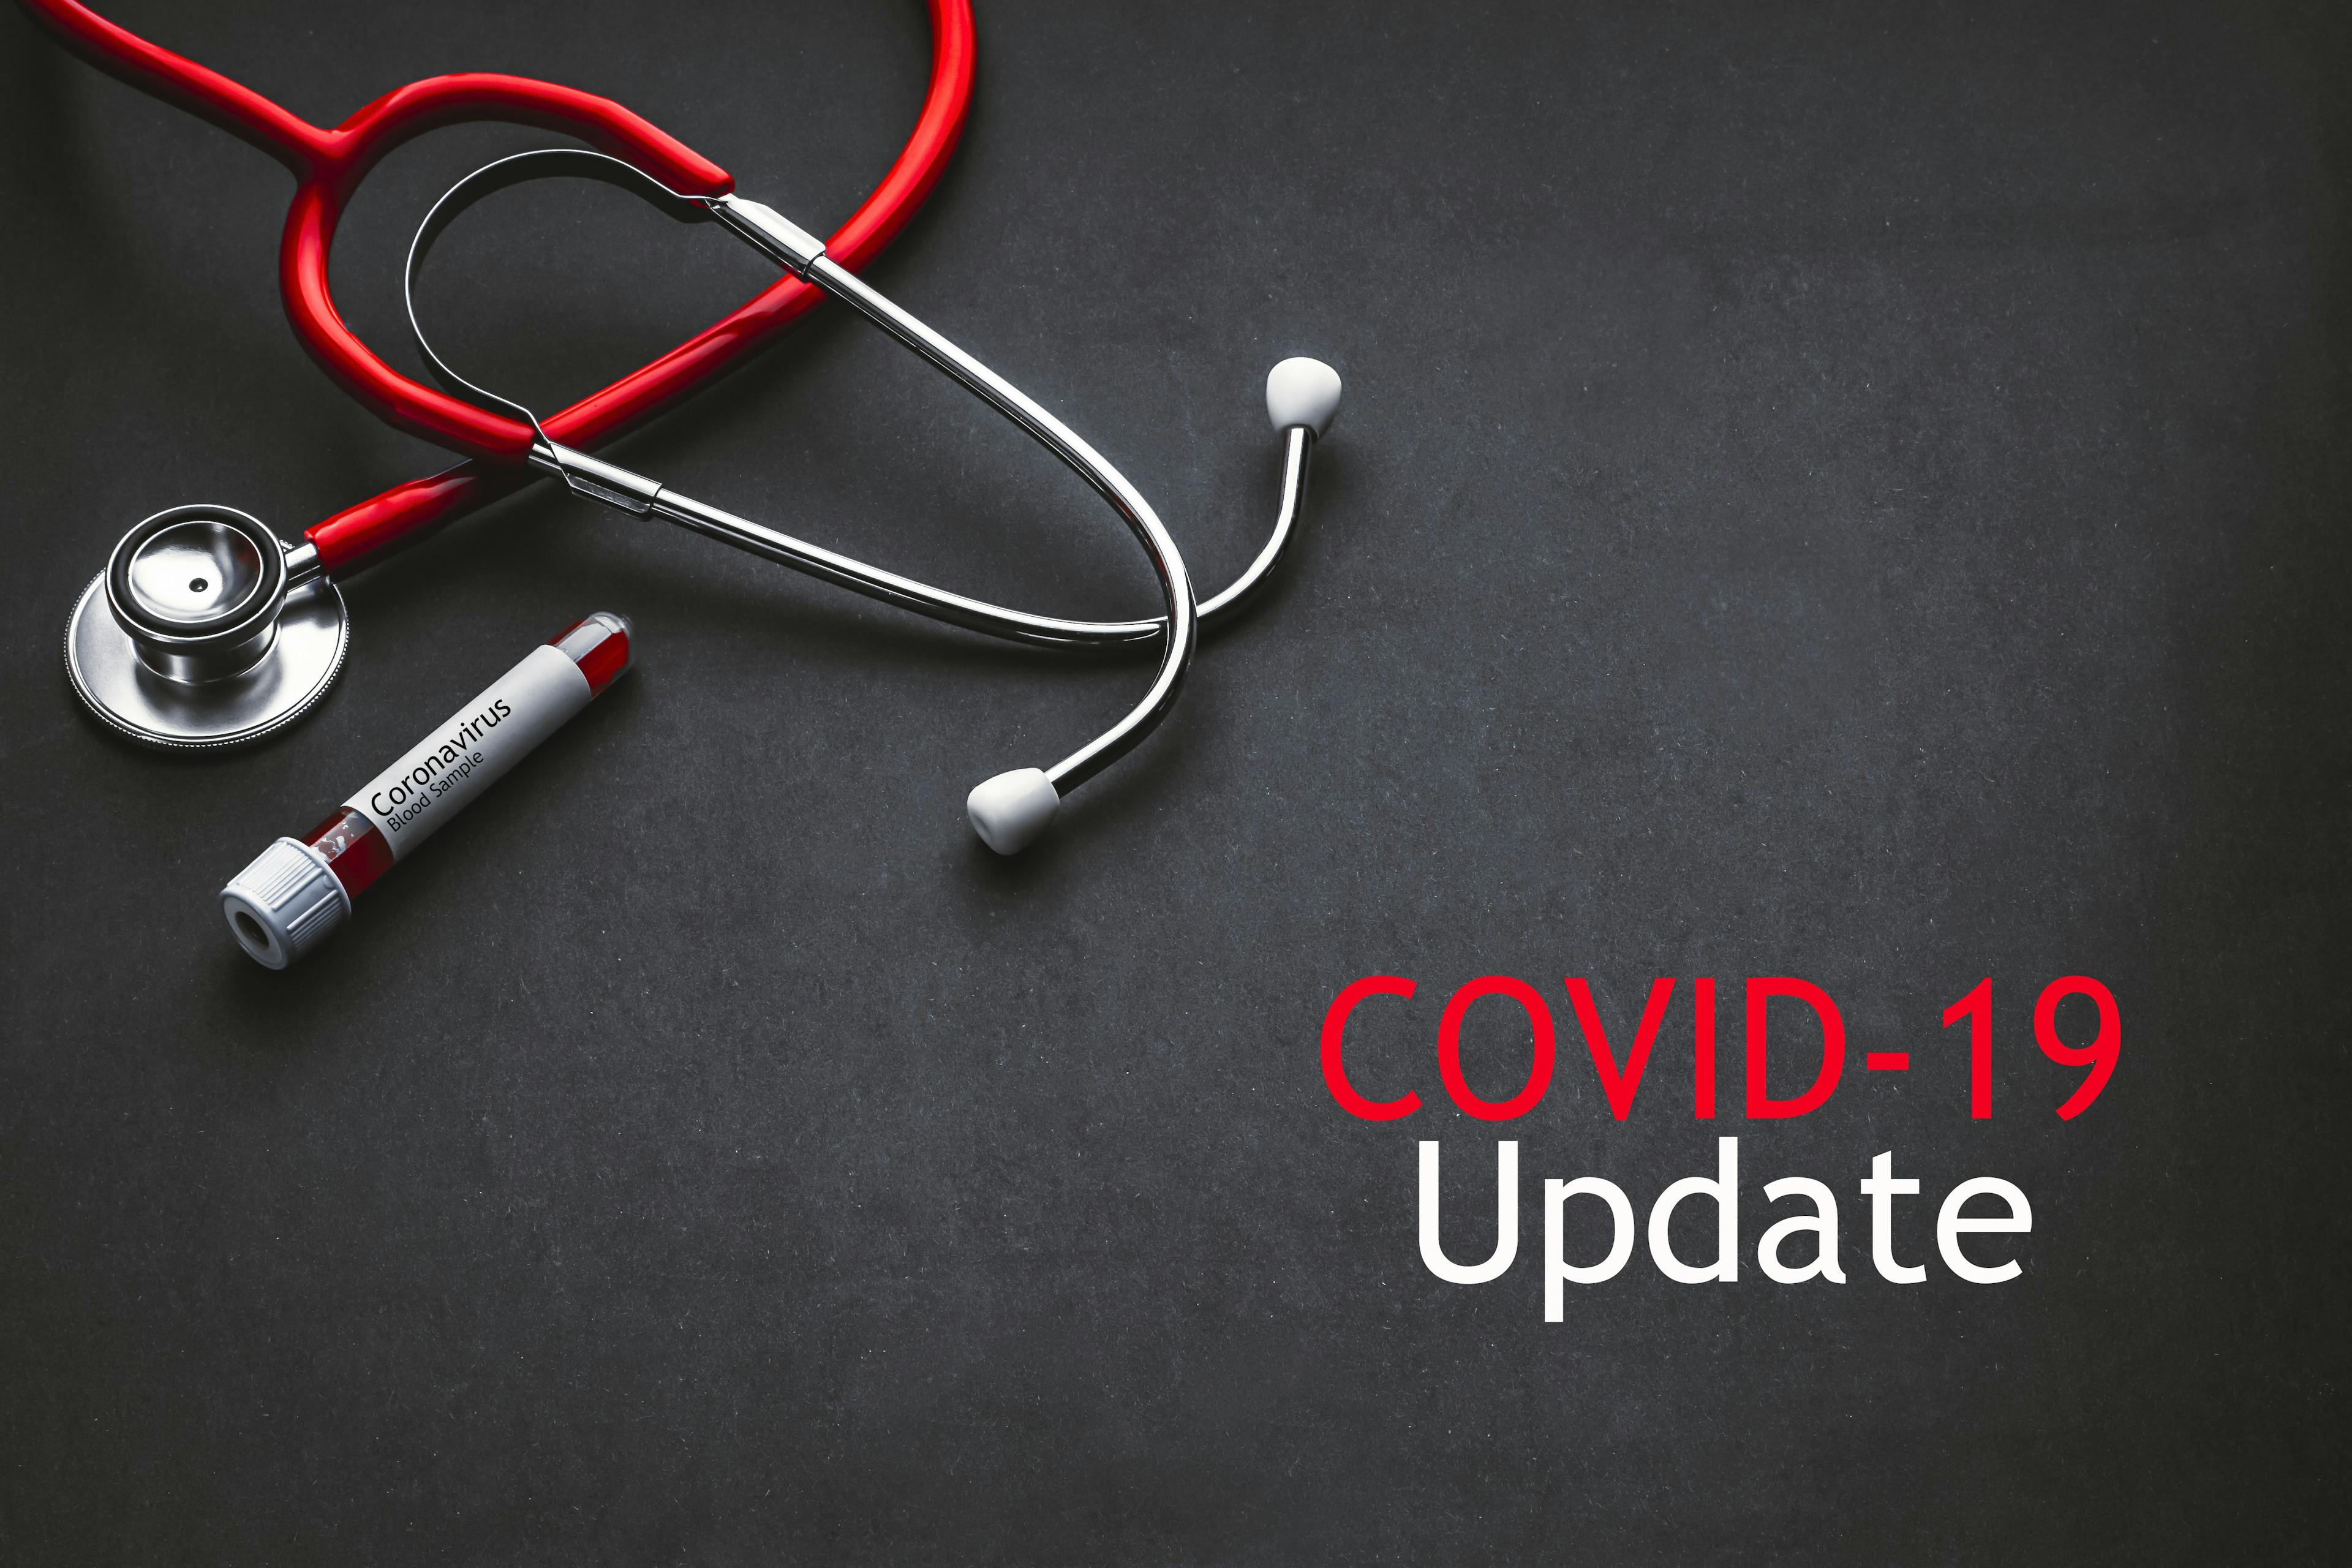 COVID-19 Update: US and Global Cases, Deaths, and Recoveries as of August 4, 2020